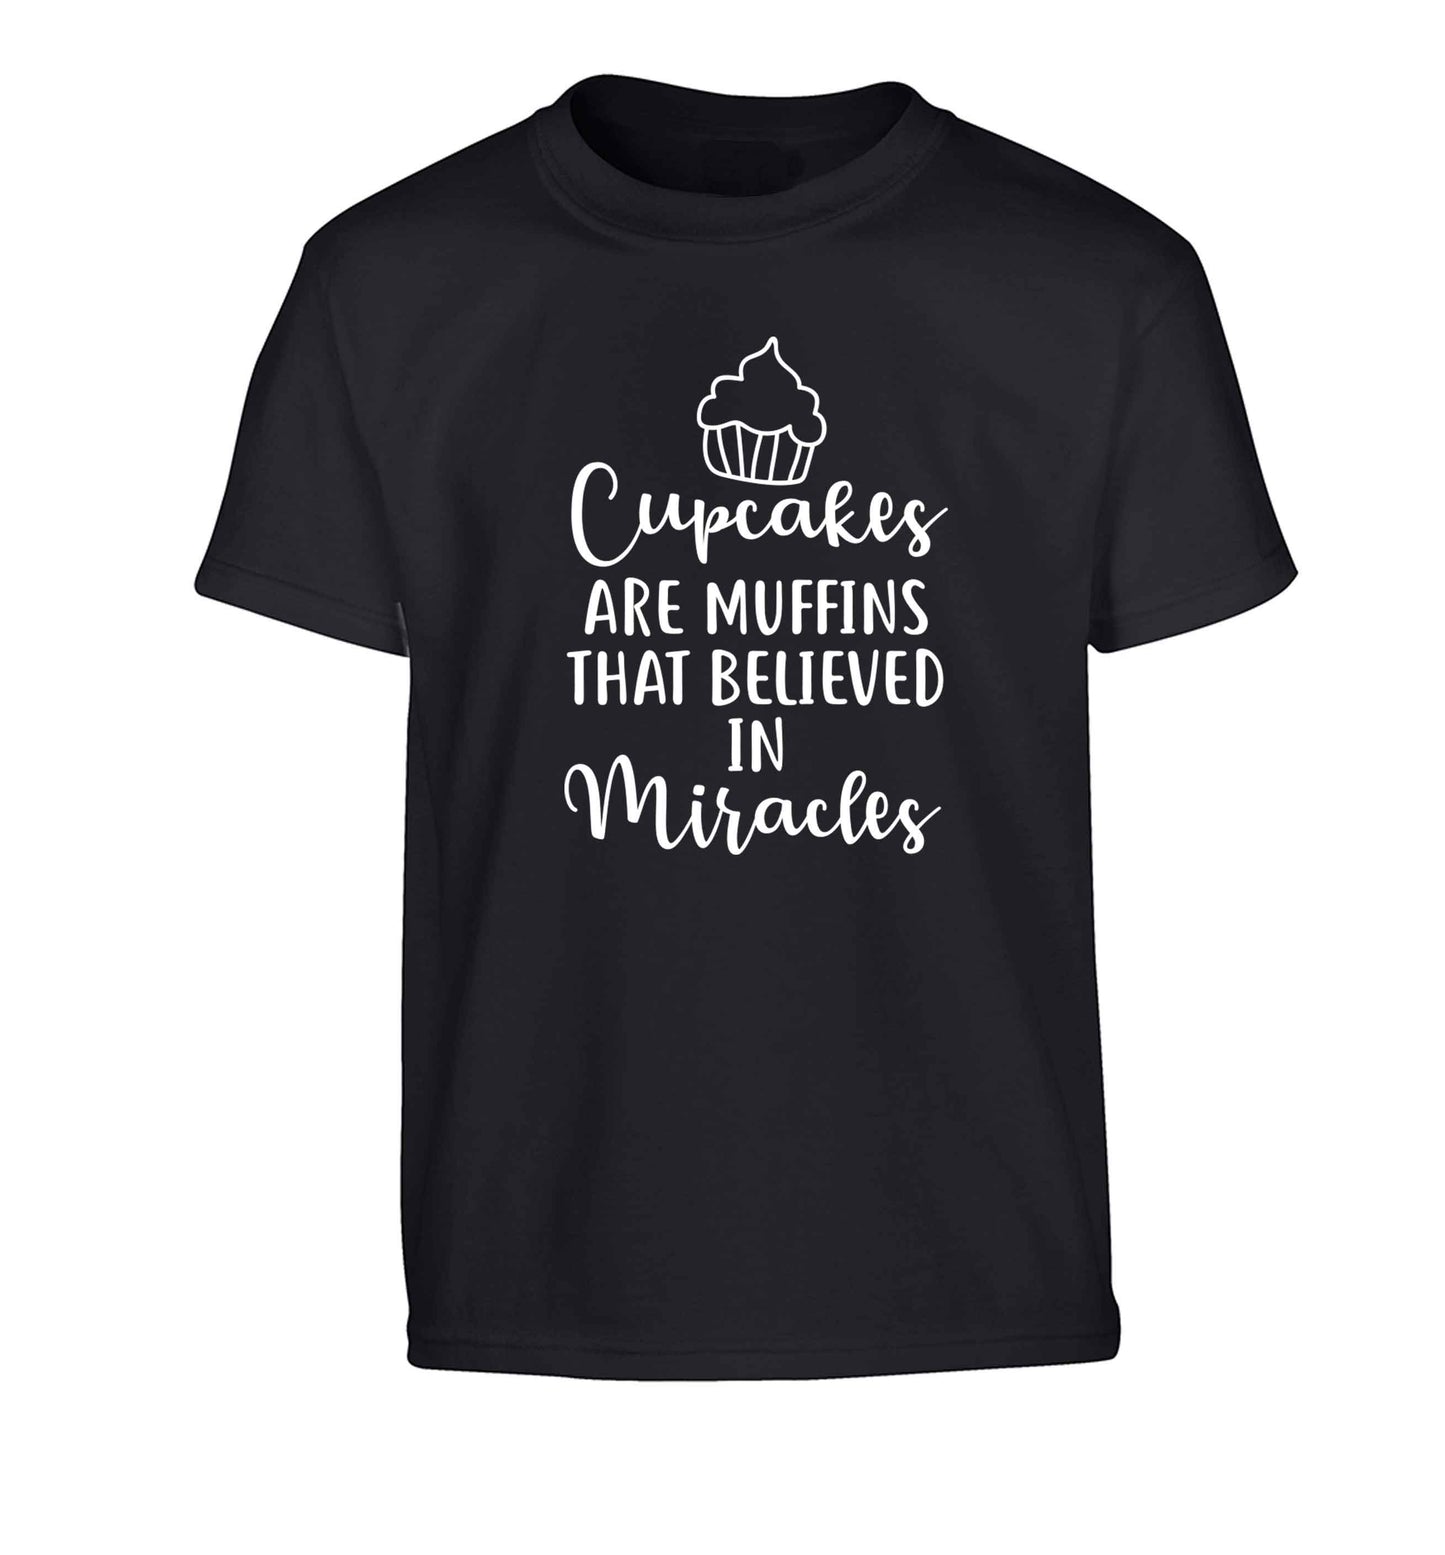 Cupcakes muffins that believed in miracles Children's black Tshirt 12-13 Years